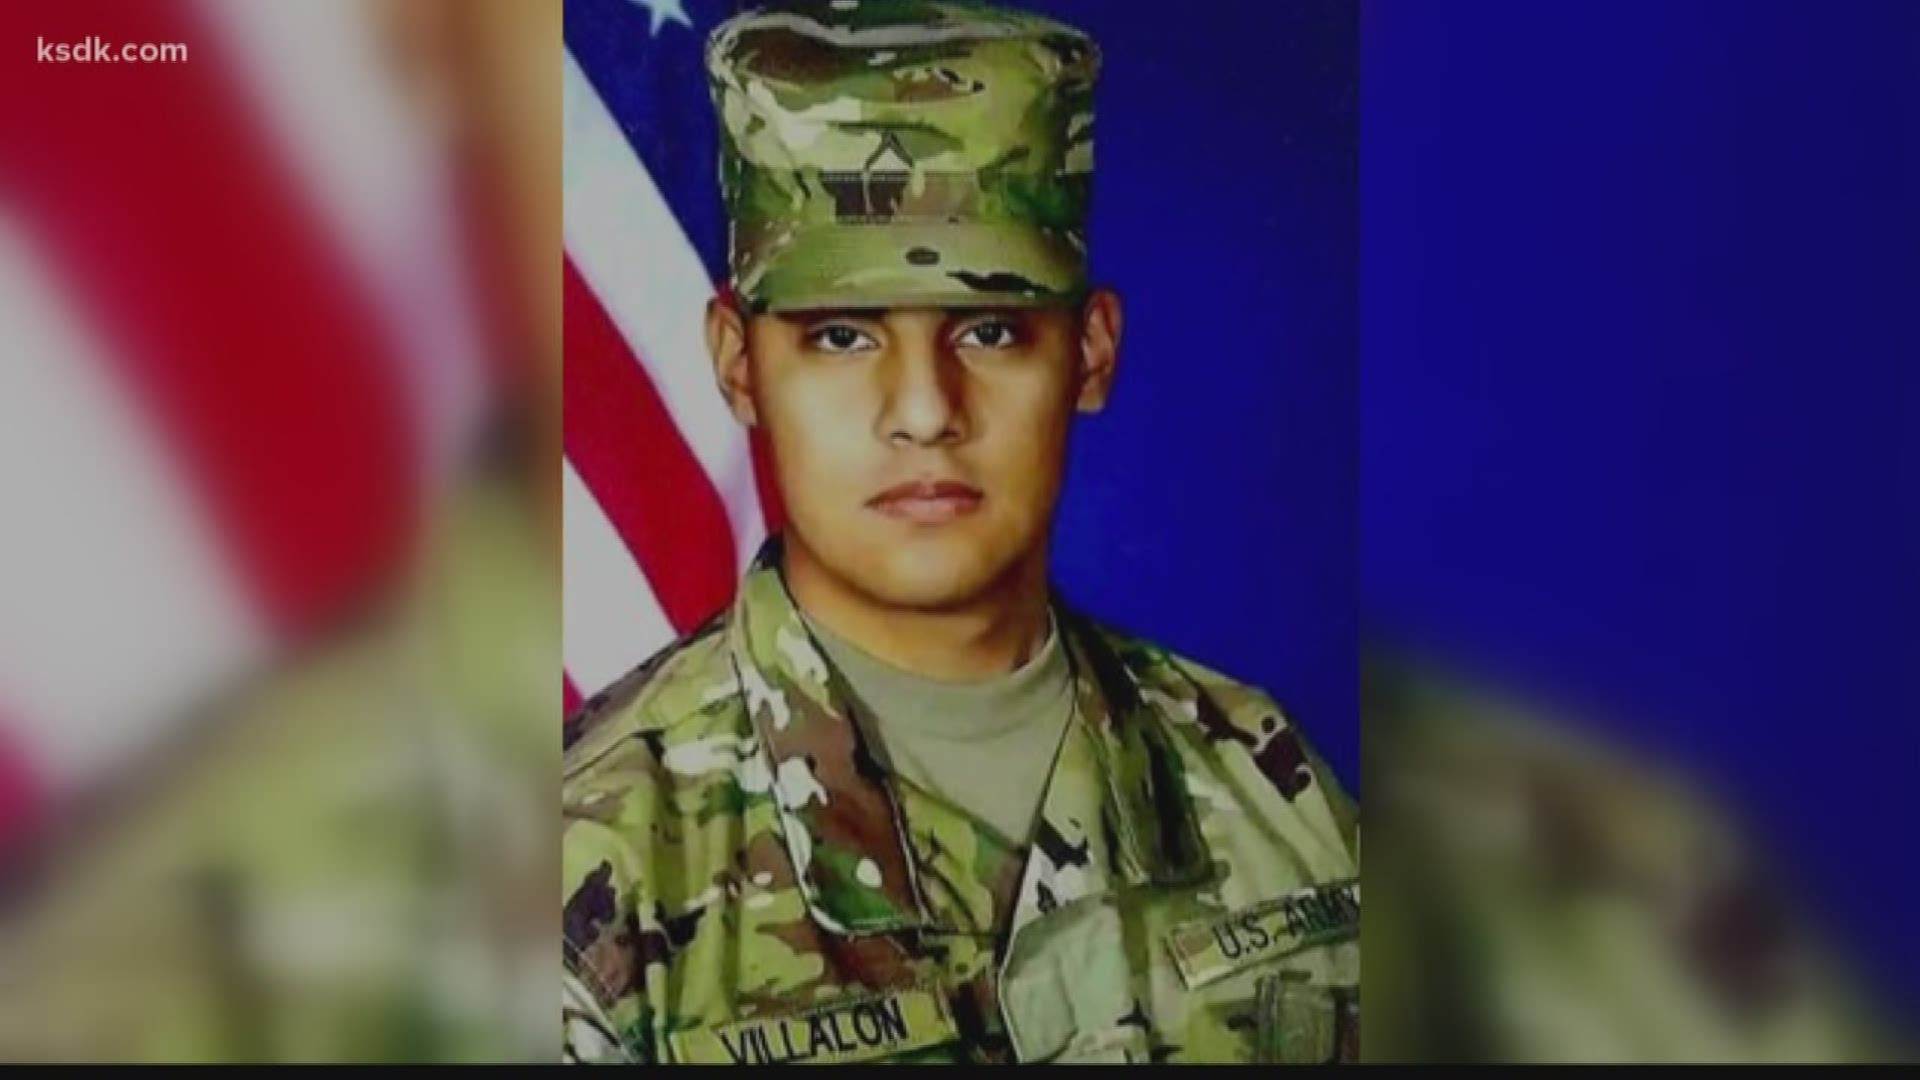 Miguel Villalon, 21, was one of two U.S. service members killed by a roadside bomb in Afghanistan Saturday.